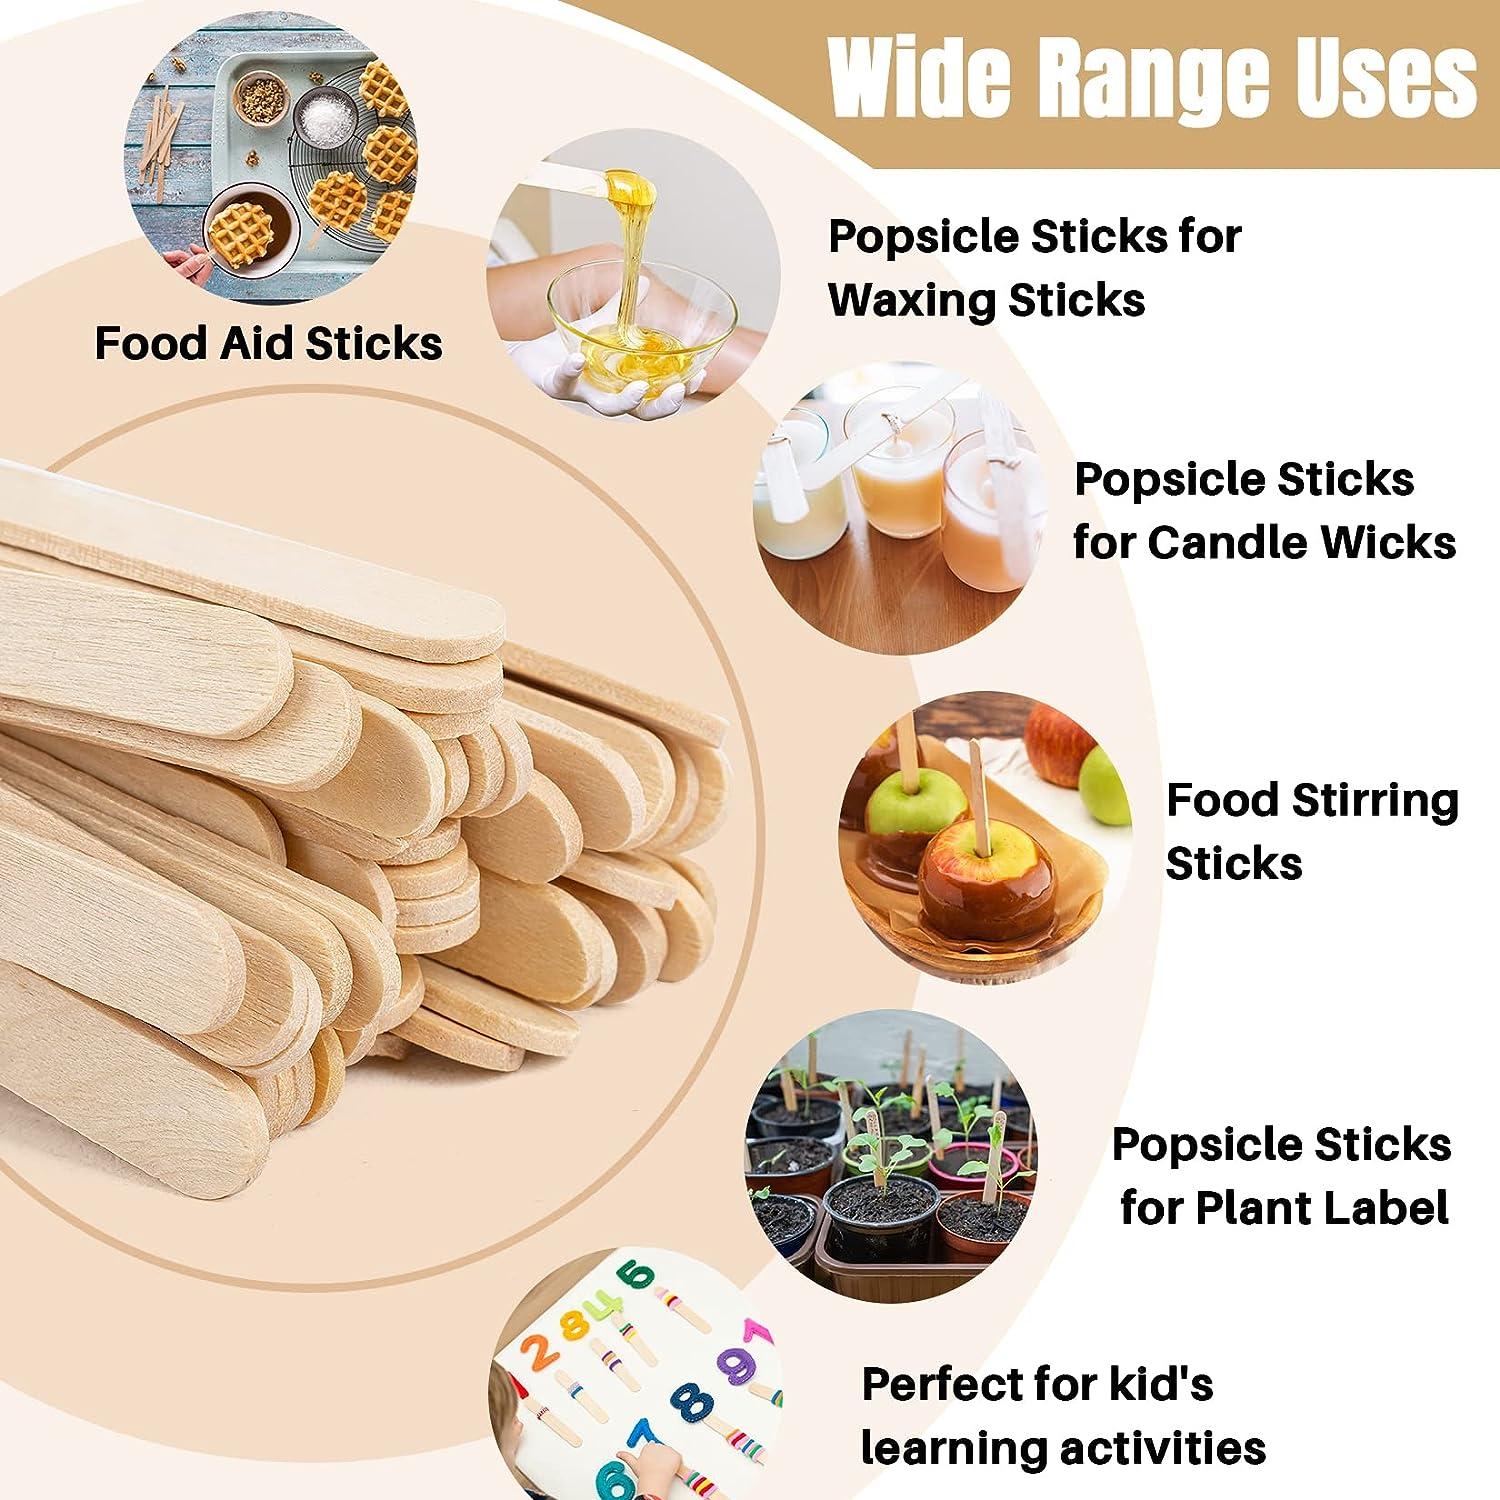 Round Wooden Sticks For Crafts Food Ice Lollies Model Making Stick